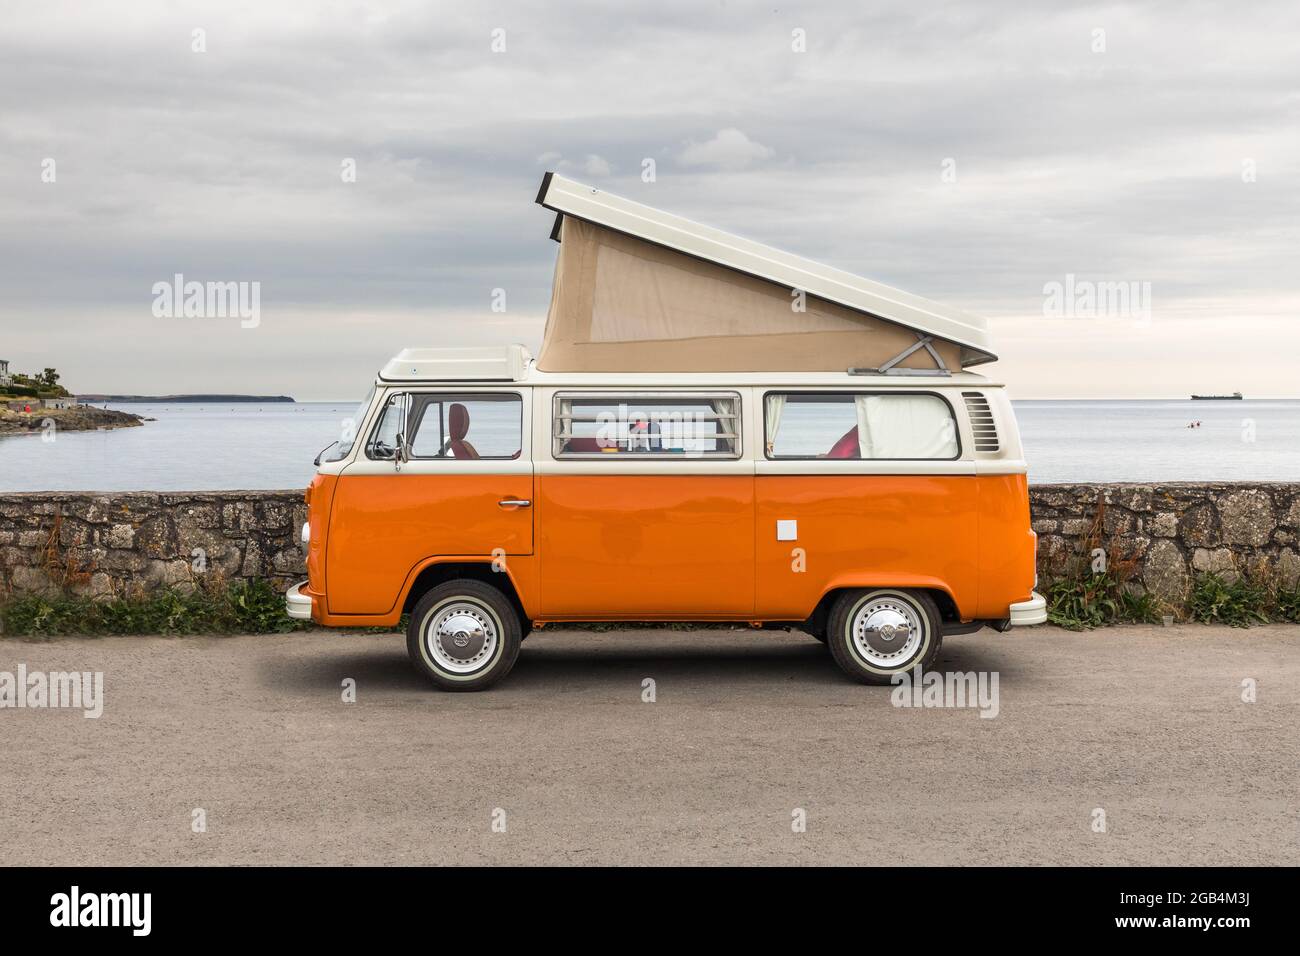 Fountainstown, Cork, Ireland. 02nd August, 2021. A second year of  staycations has seen the sale of campervans almost trebled compared to last  year. Here a vintage 1970's Volkswagen Westfalia campervan is parked